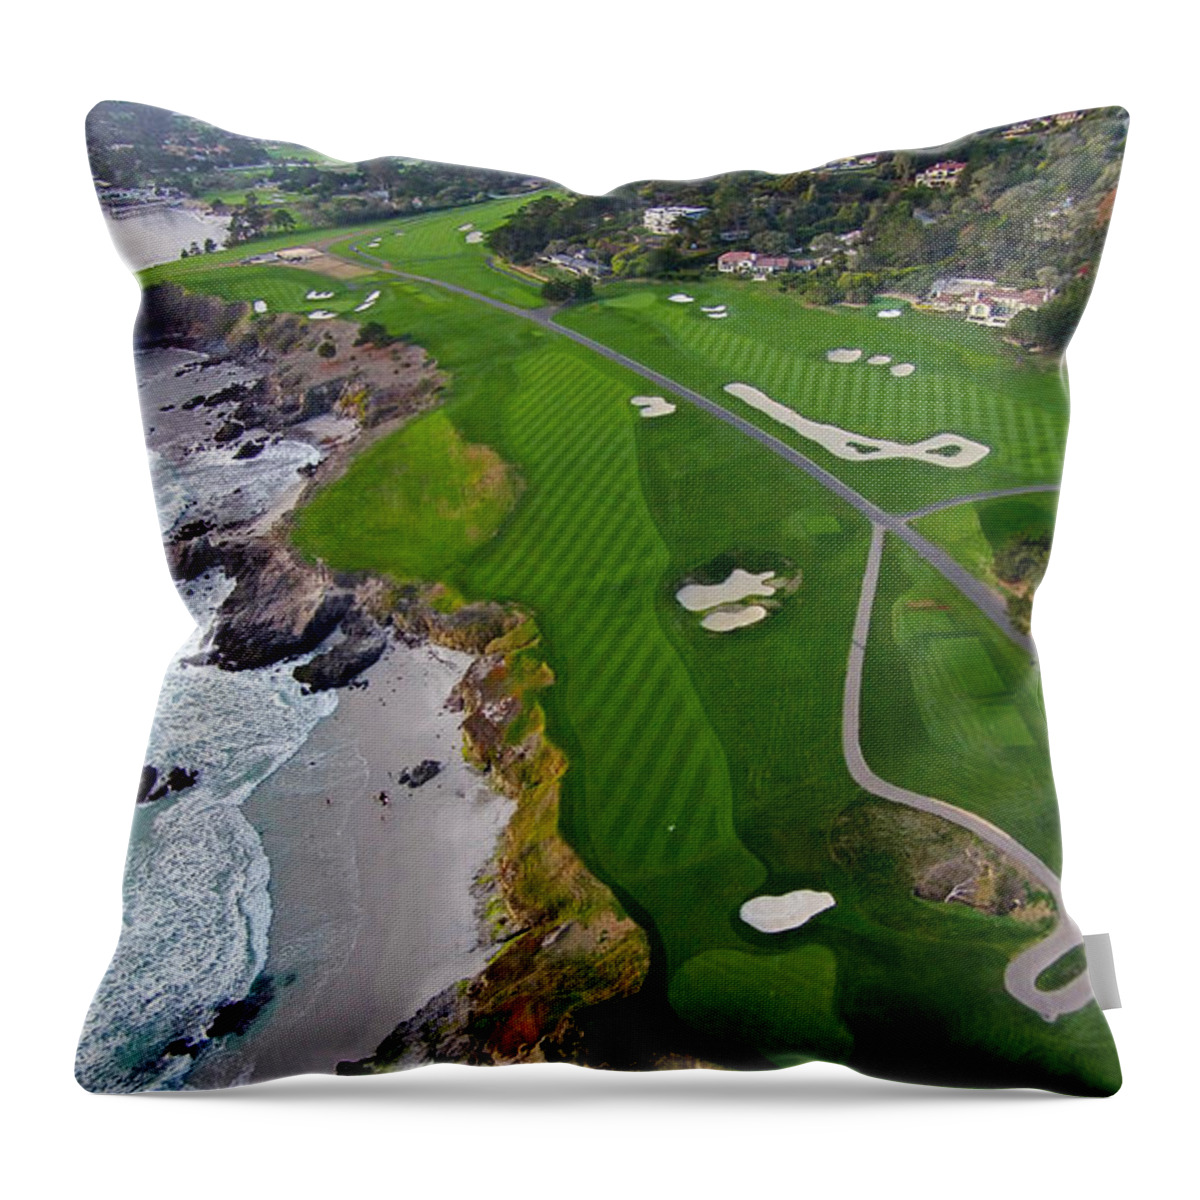 Above Throw Pillow featuring the photograph Pebble Beach Golf Course by David Levy